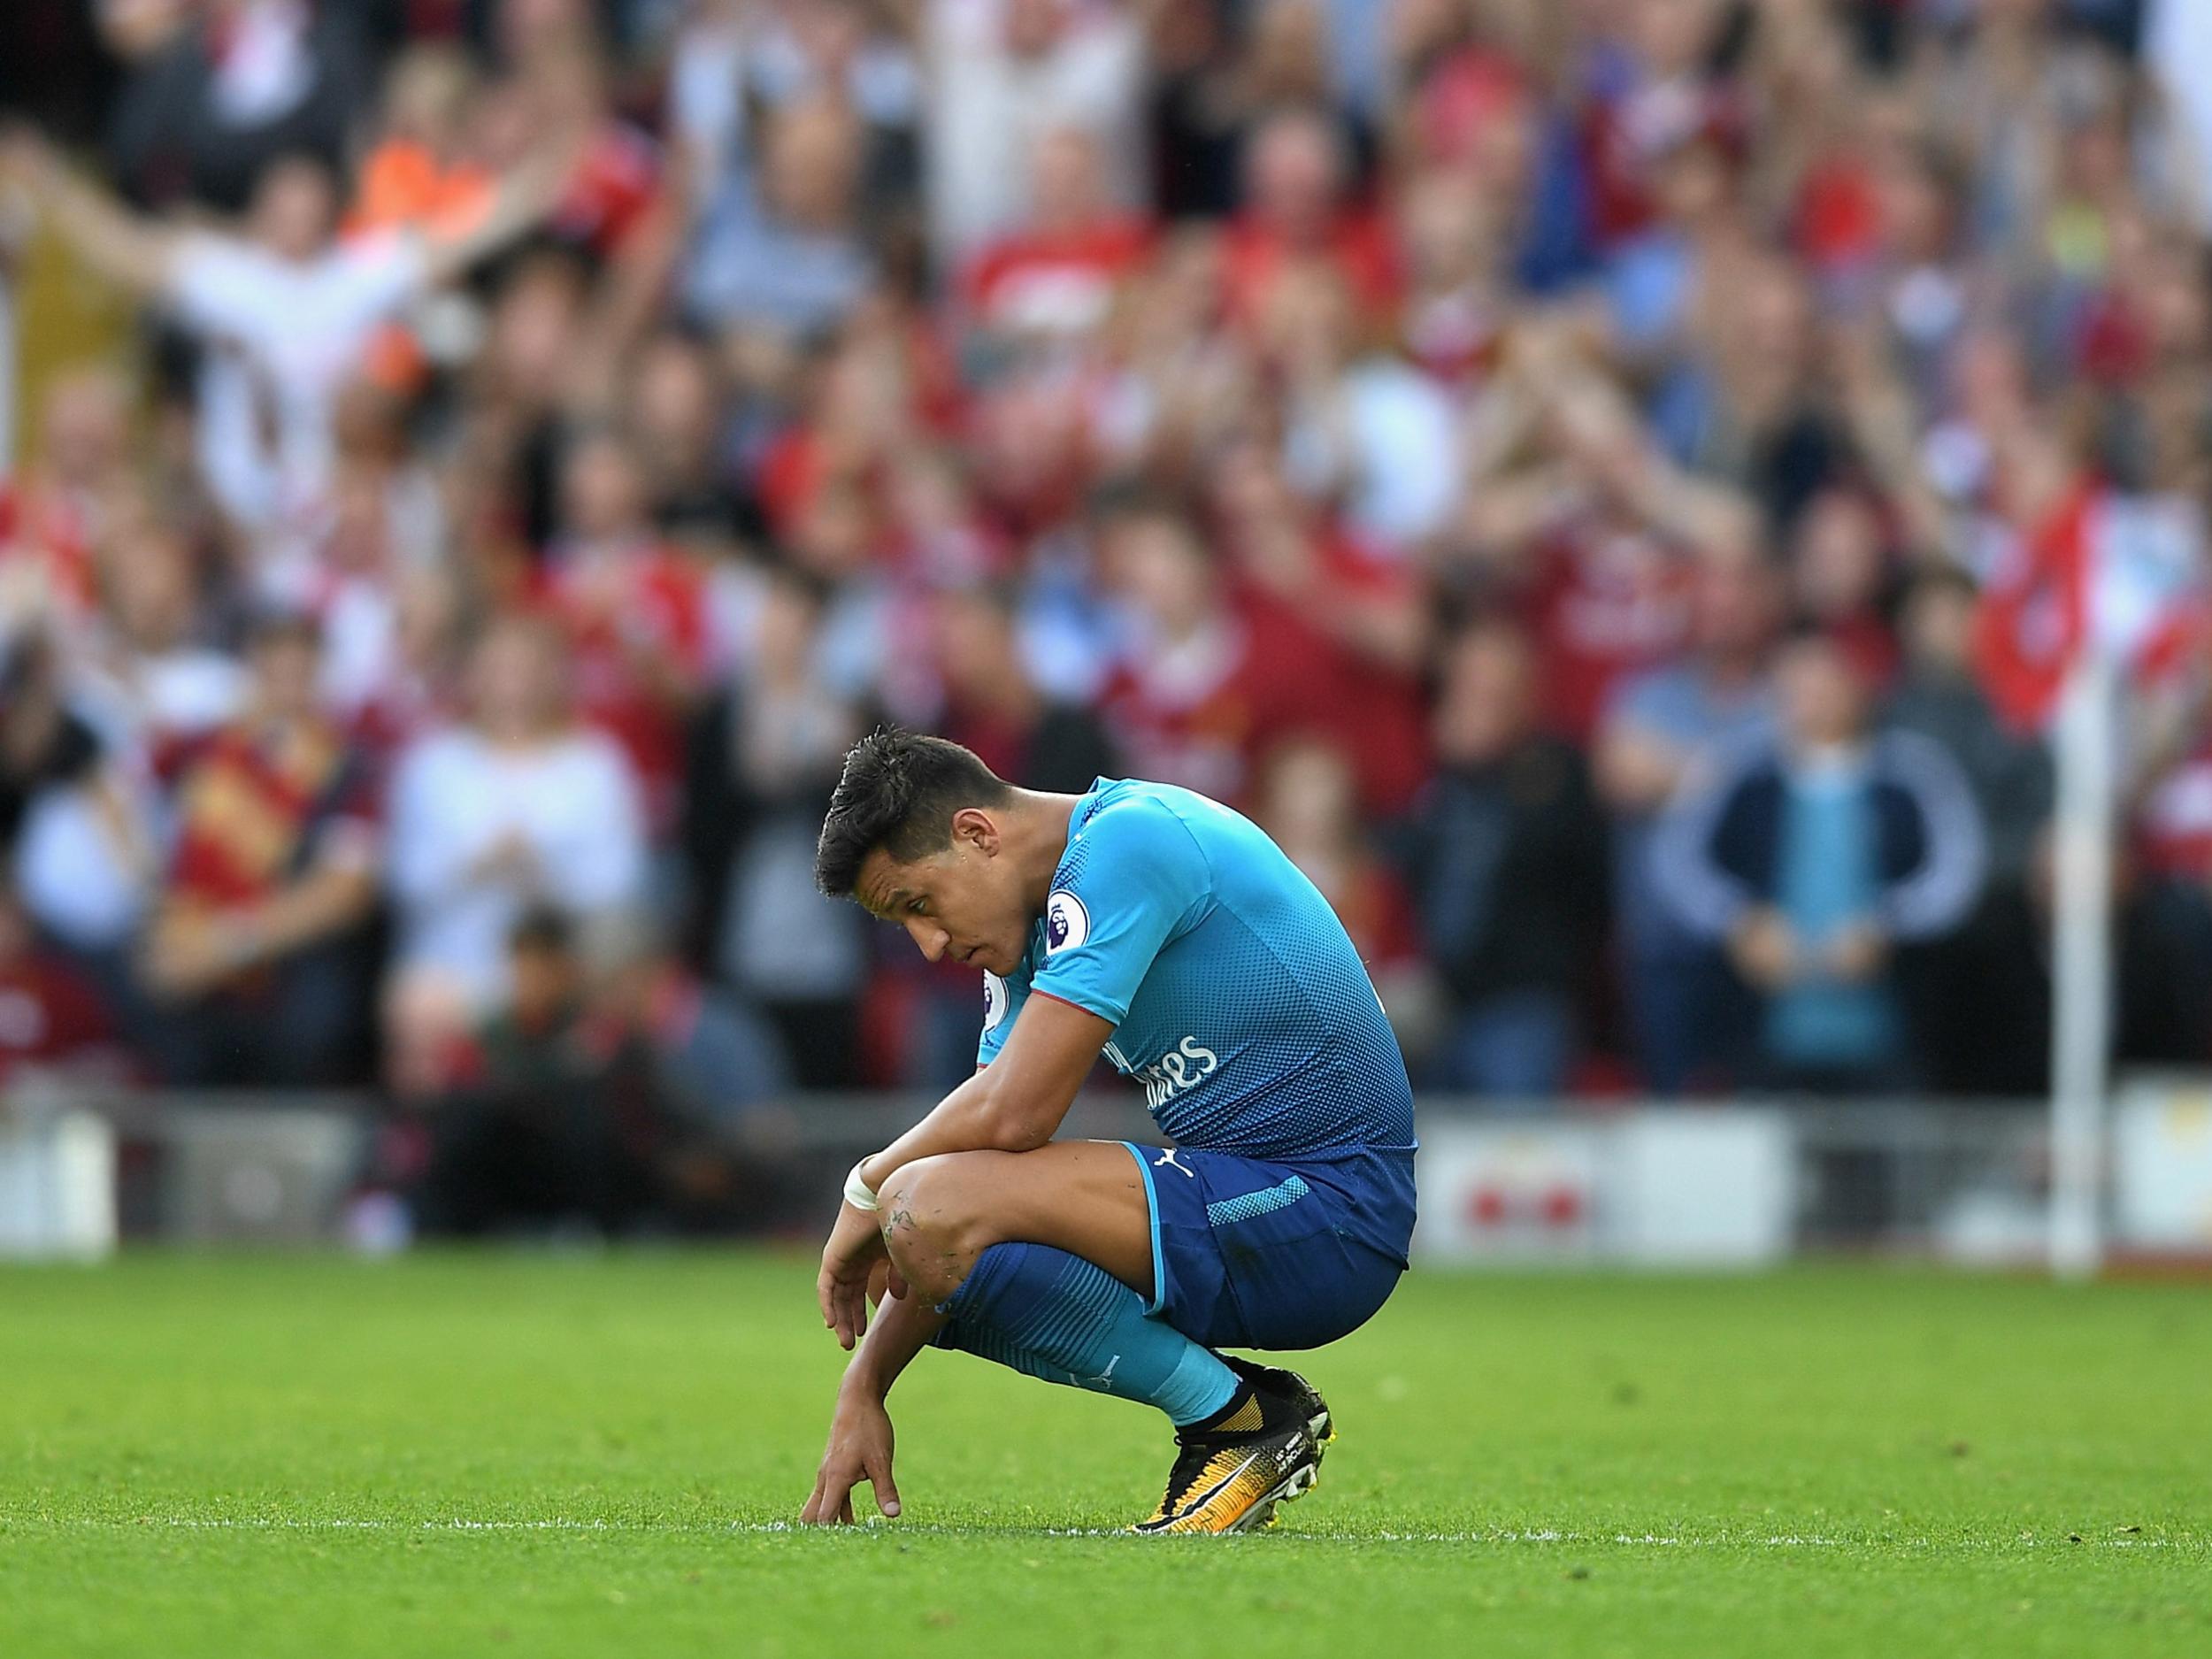 Sanchez may have played his last game for Arsenal